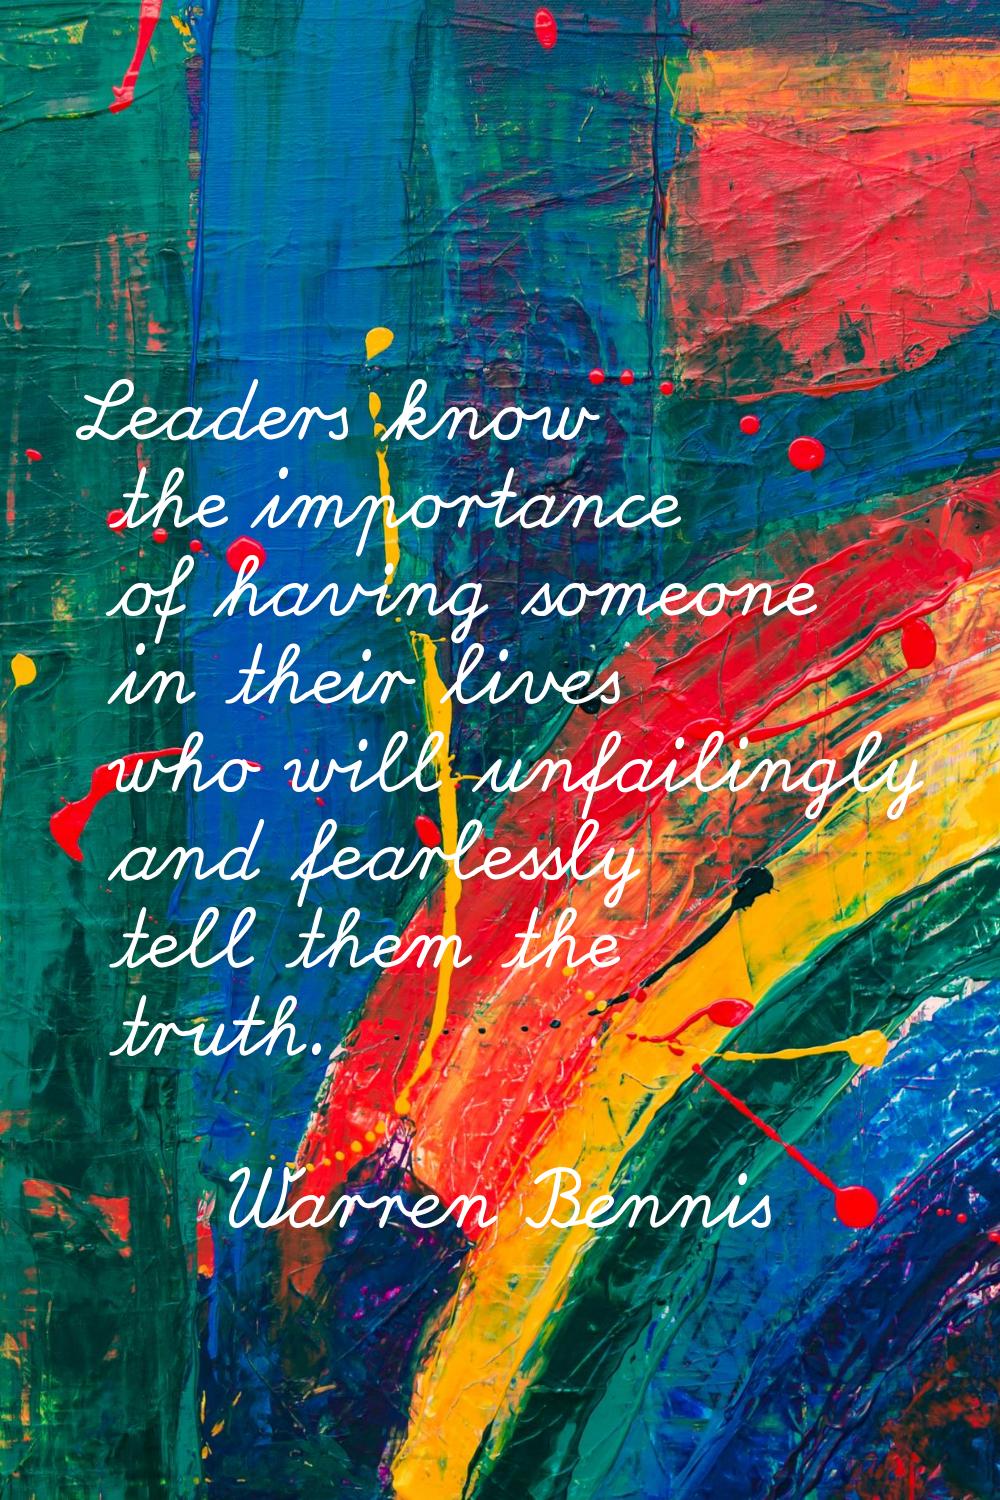 Leaders know the importance of having someone in their lives who will unfailingly and fearlessly te